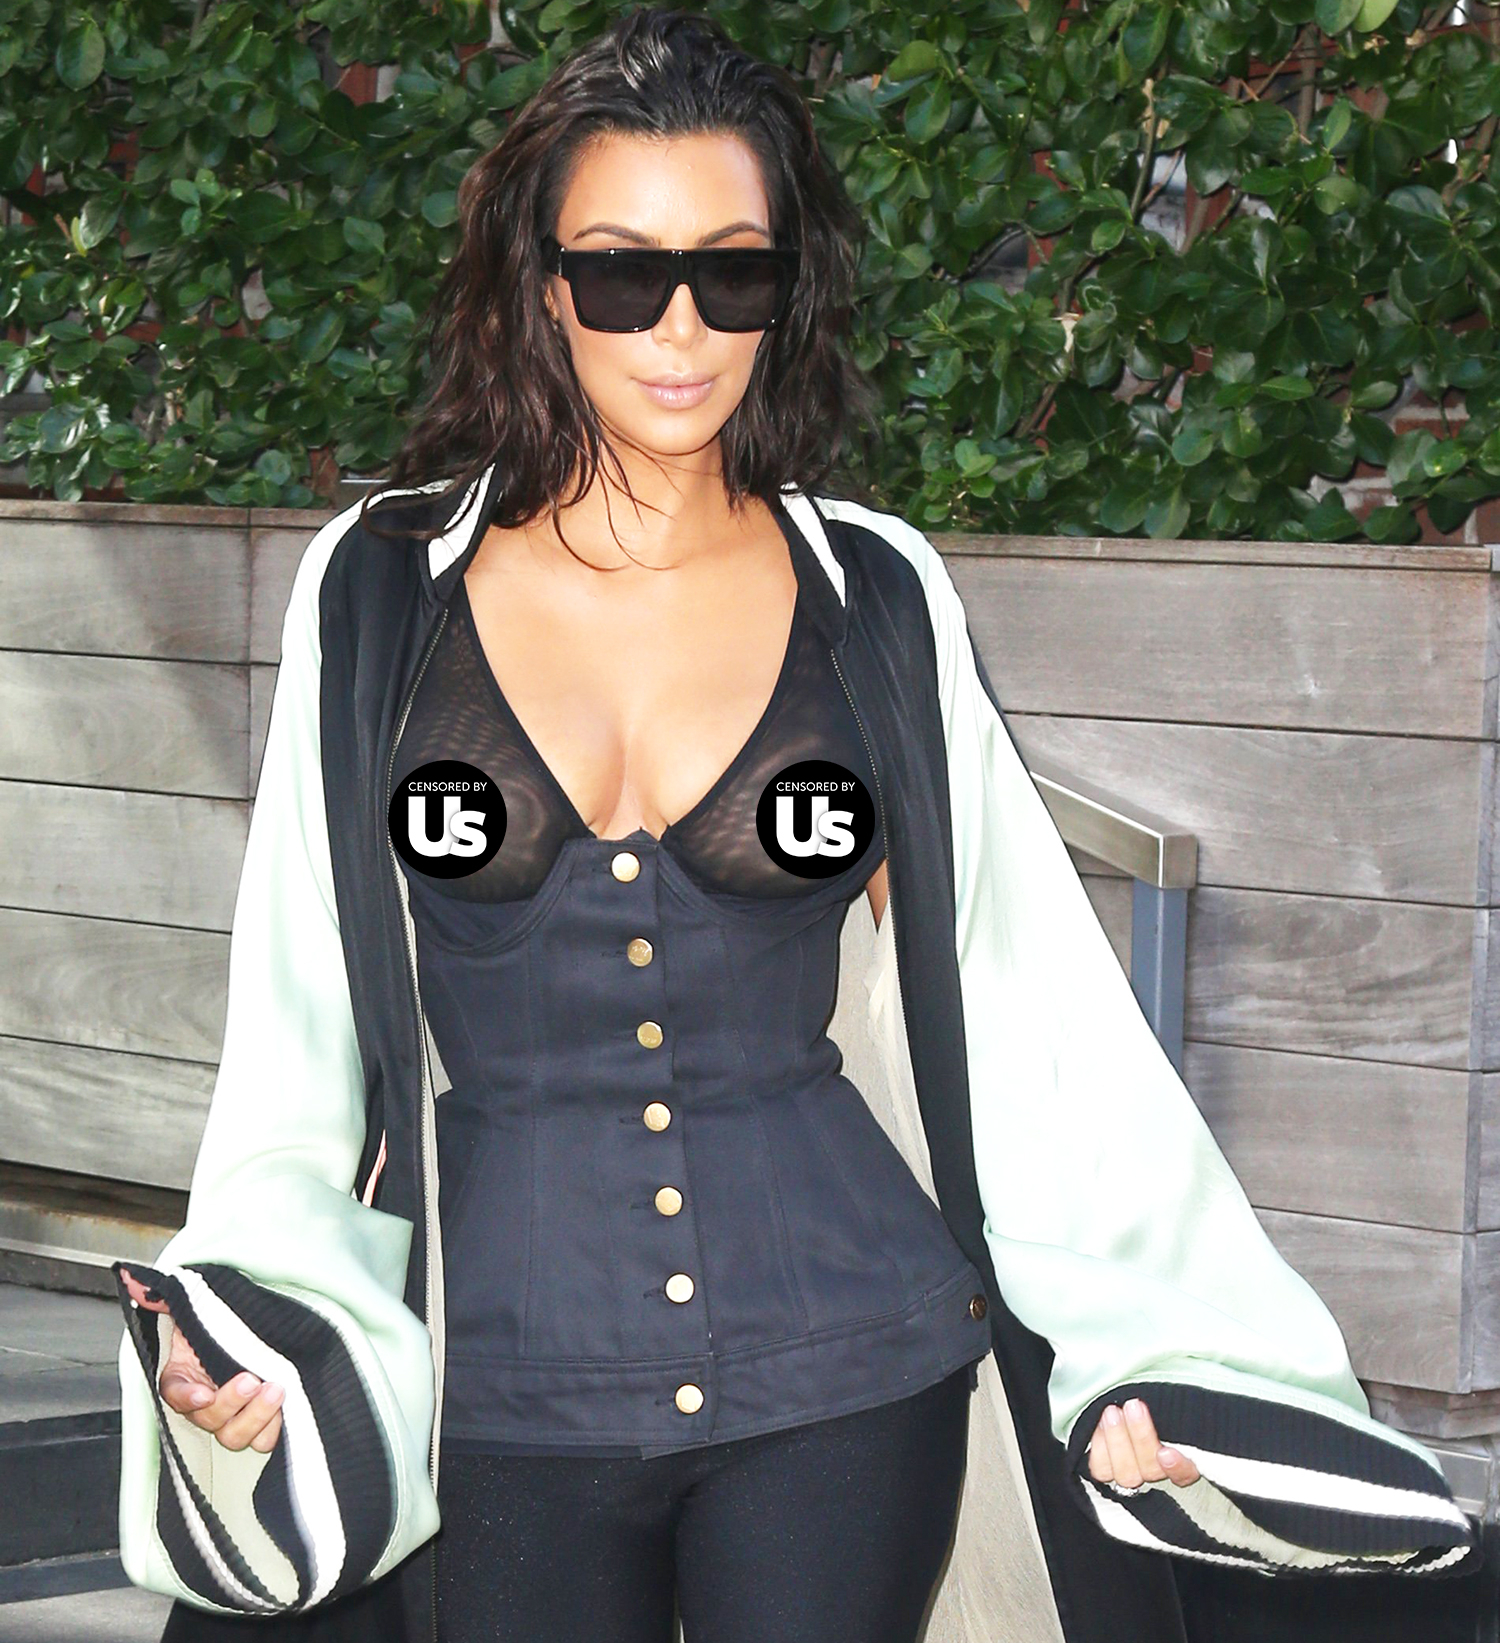 Kim Kardashian Bares Her Nipples While out in NYC